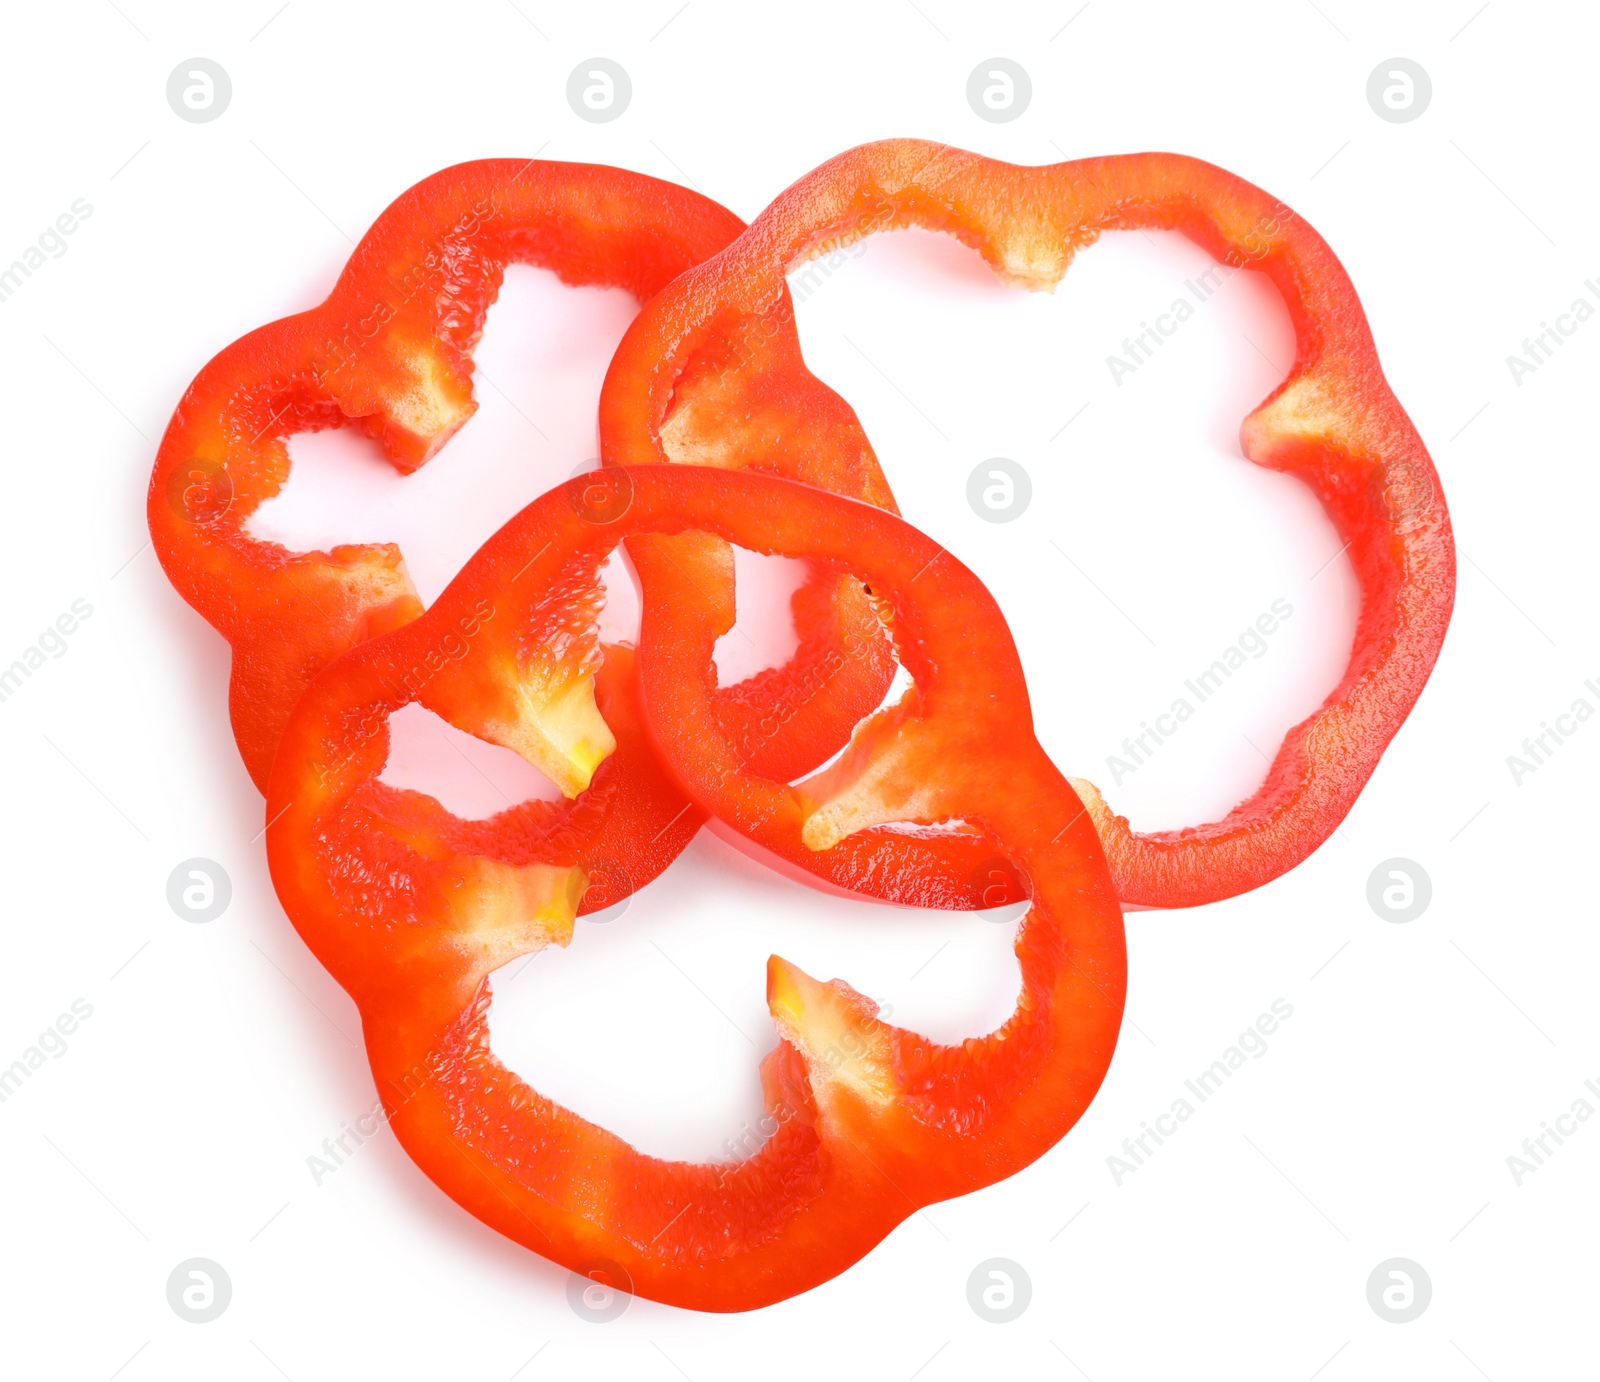 Photo of Slices of red bell pepper isolated on white